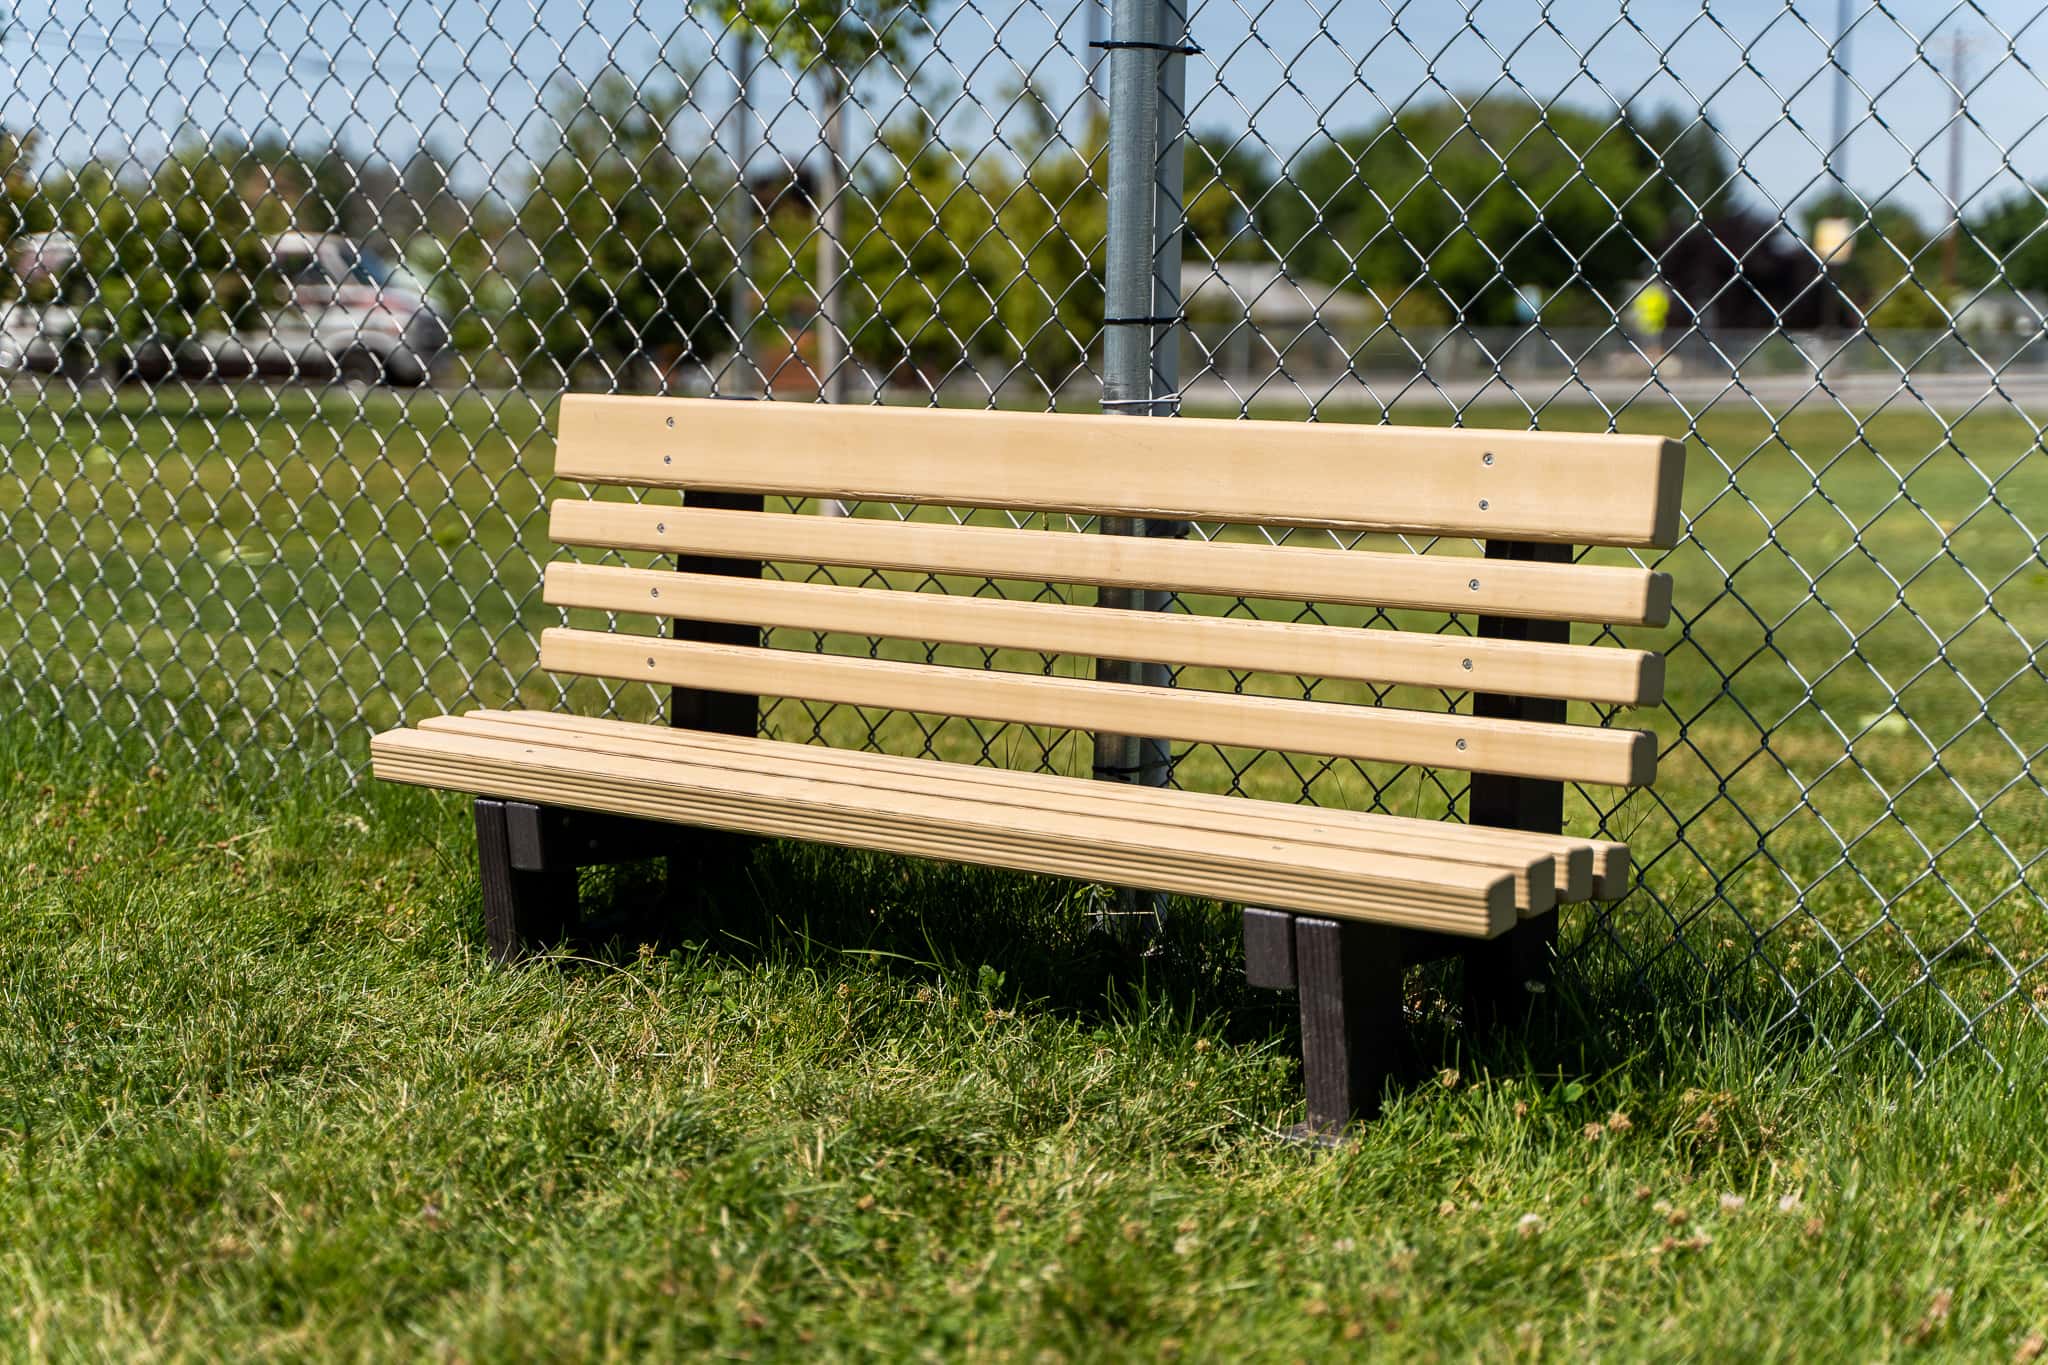 Bench in Play Area